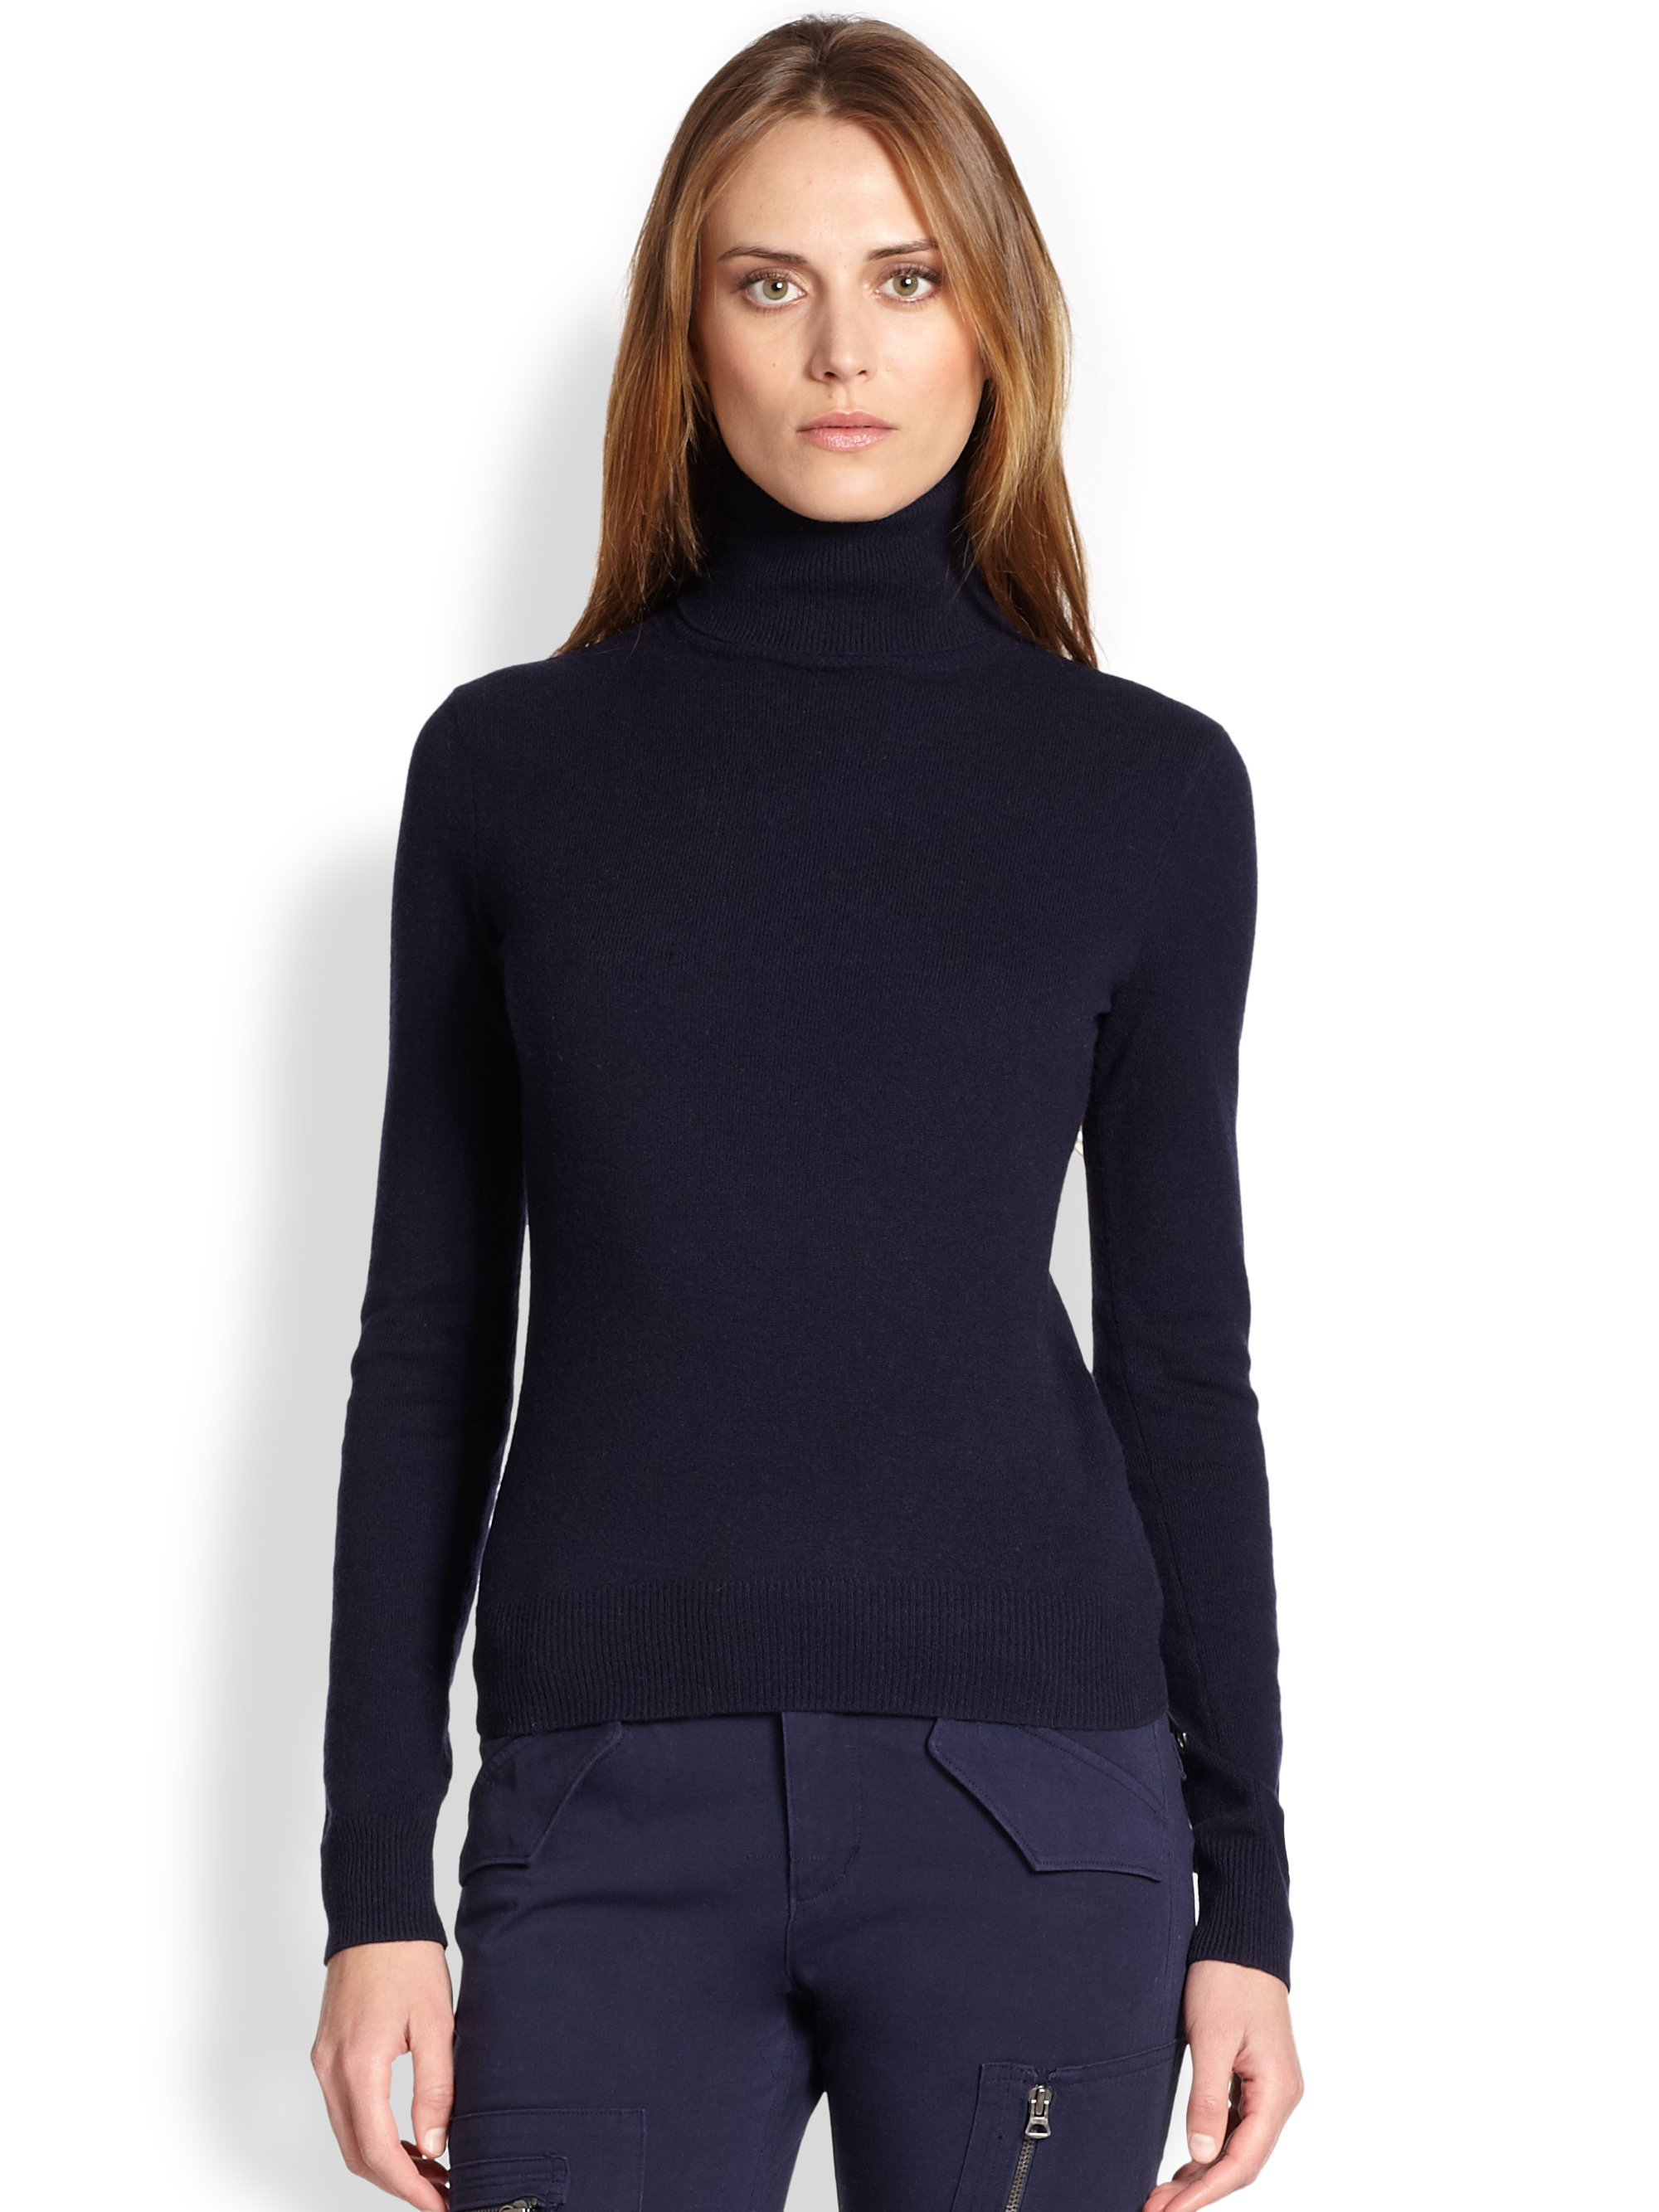 Lyst - Ralph Lauren Blue Label Woolcashmere Ribbed Turtleneck in Natural